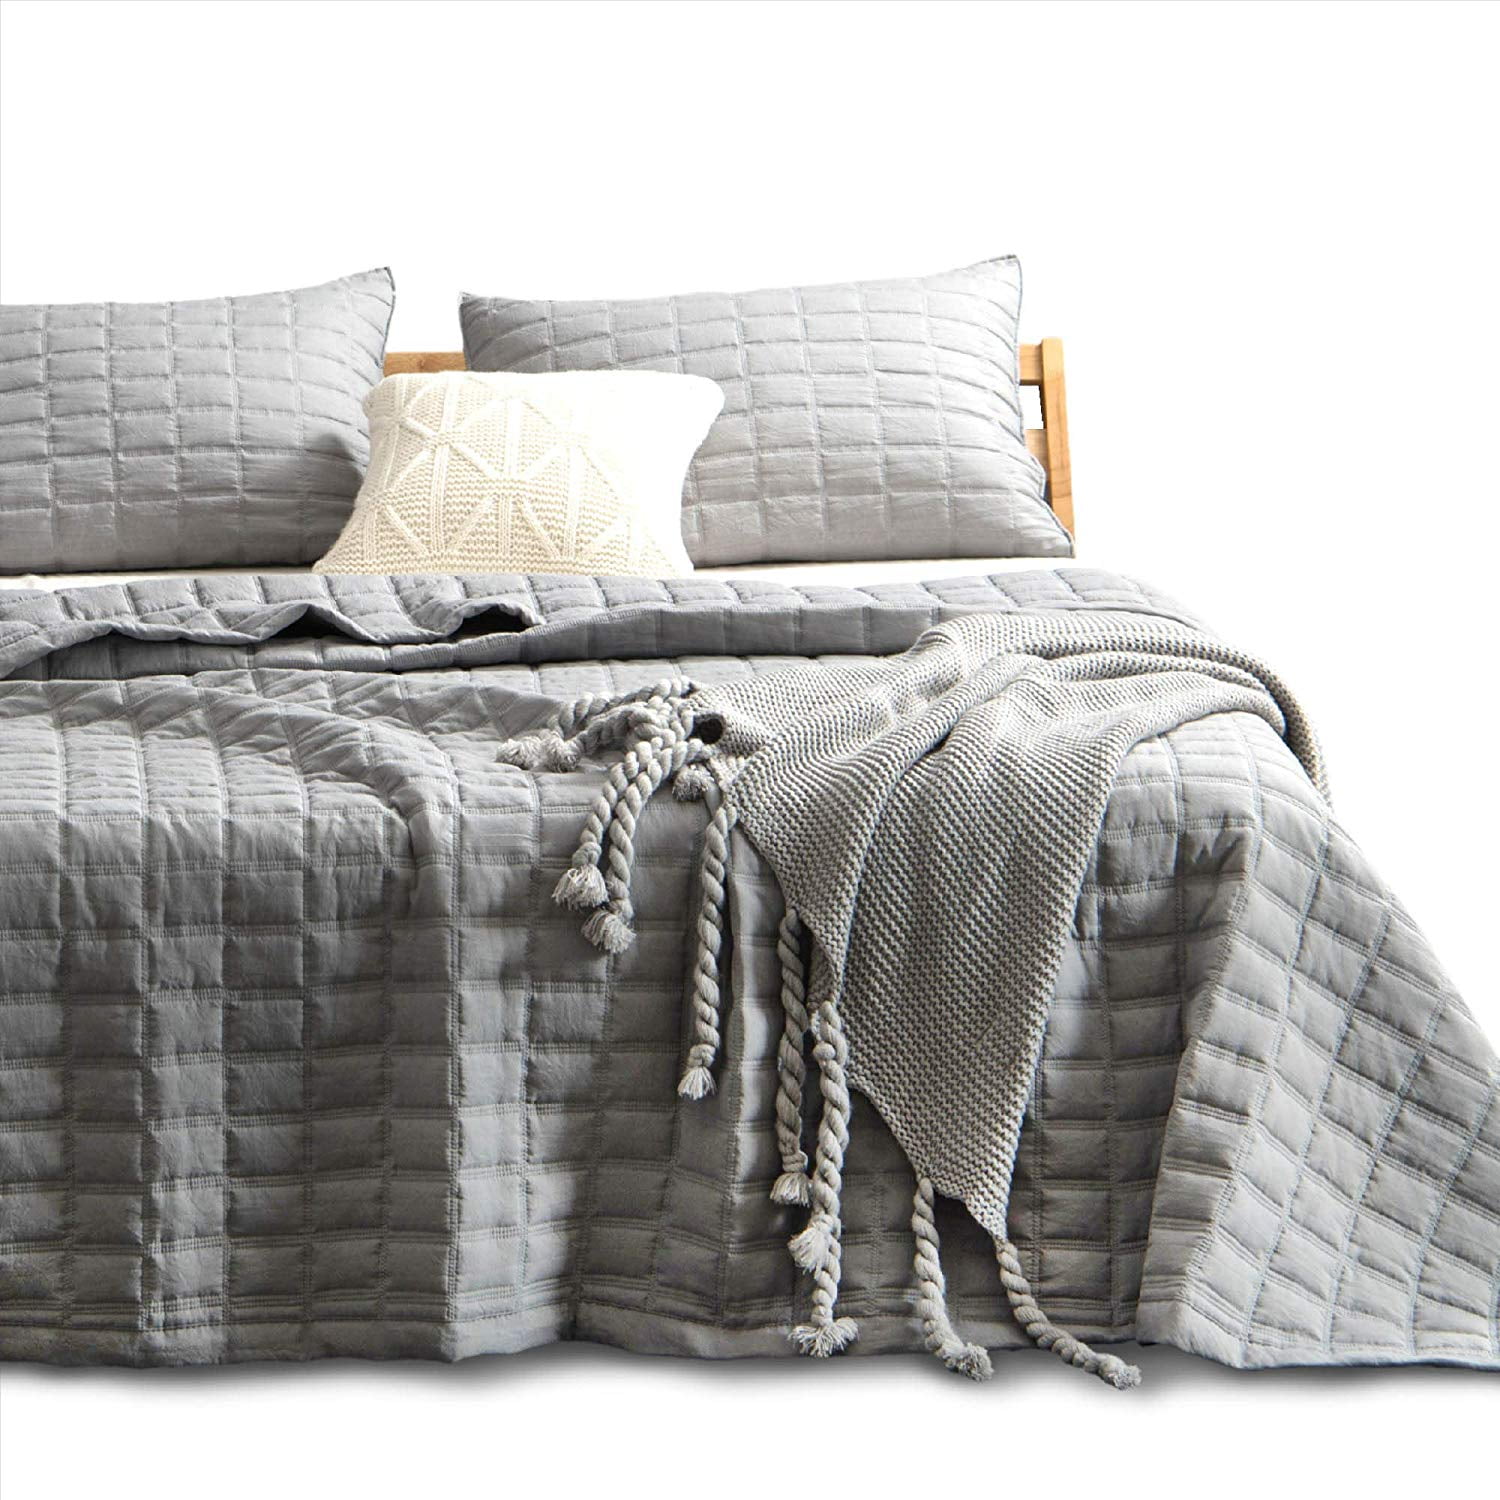 Details about   KASENTEX Stone Washed Quilted Coverlet Set with 2 Standard Sham 100% Cotton Ult 